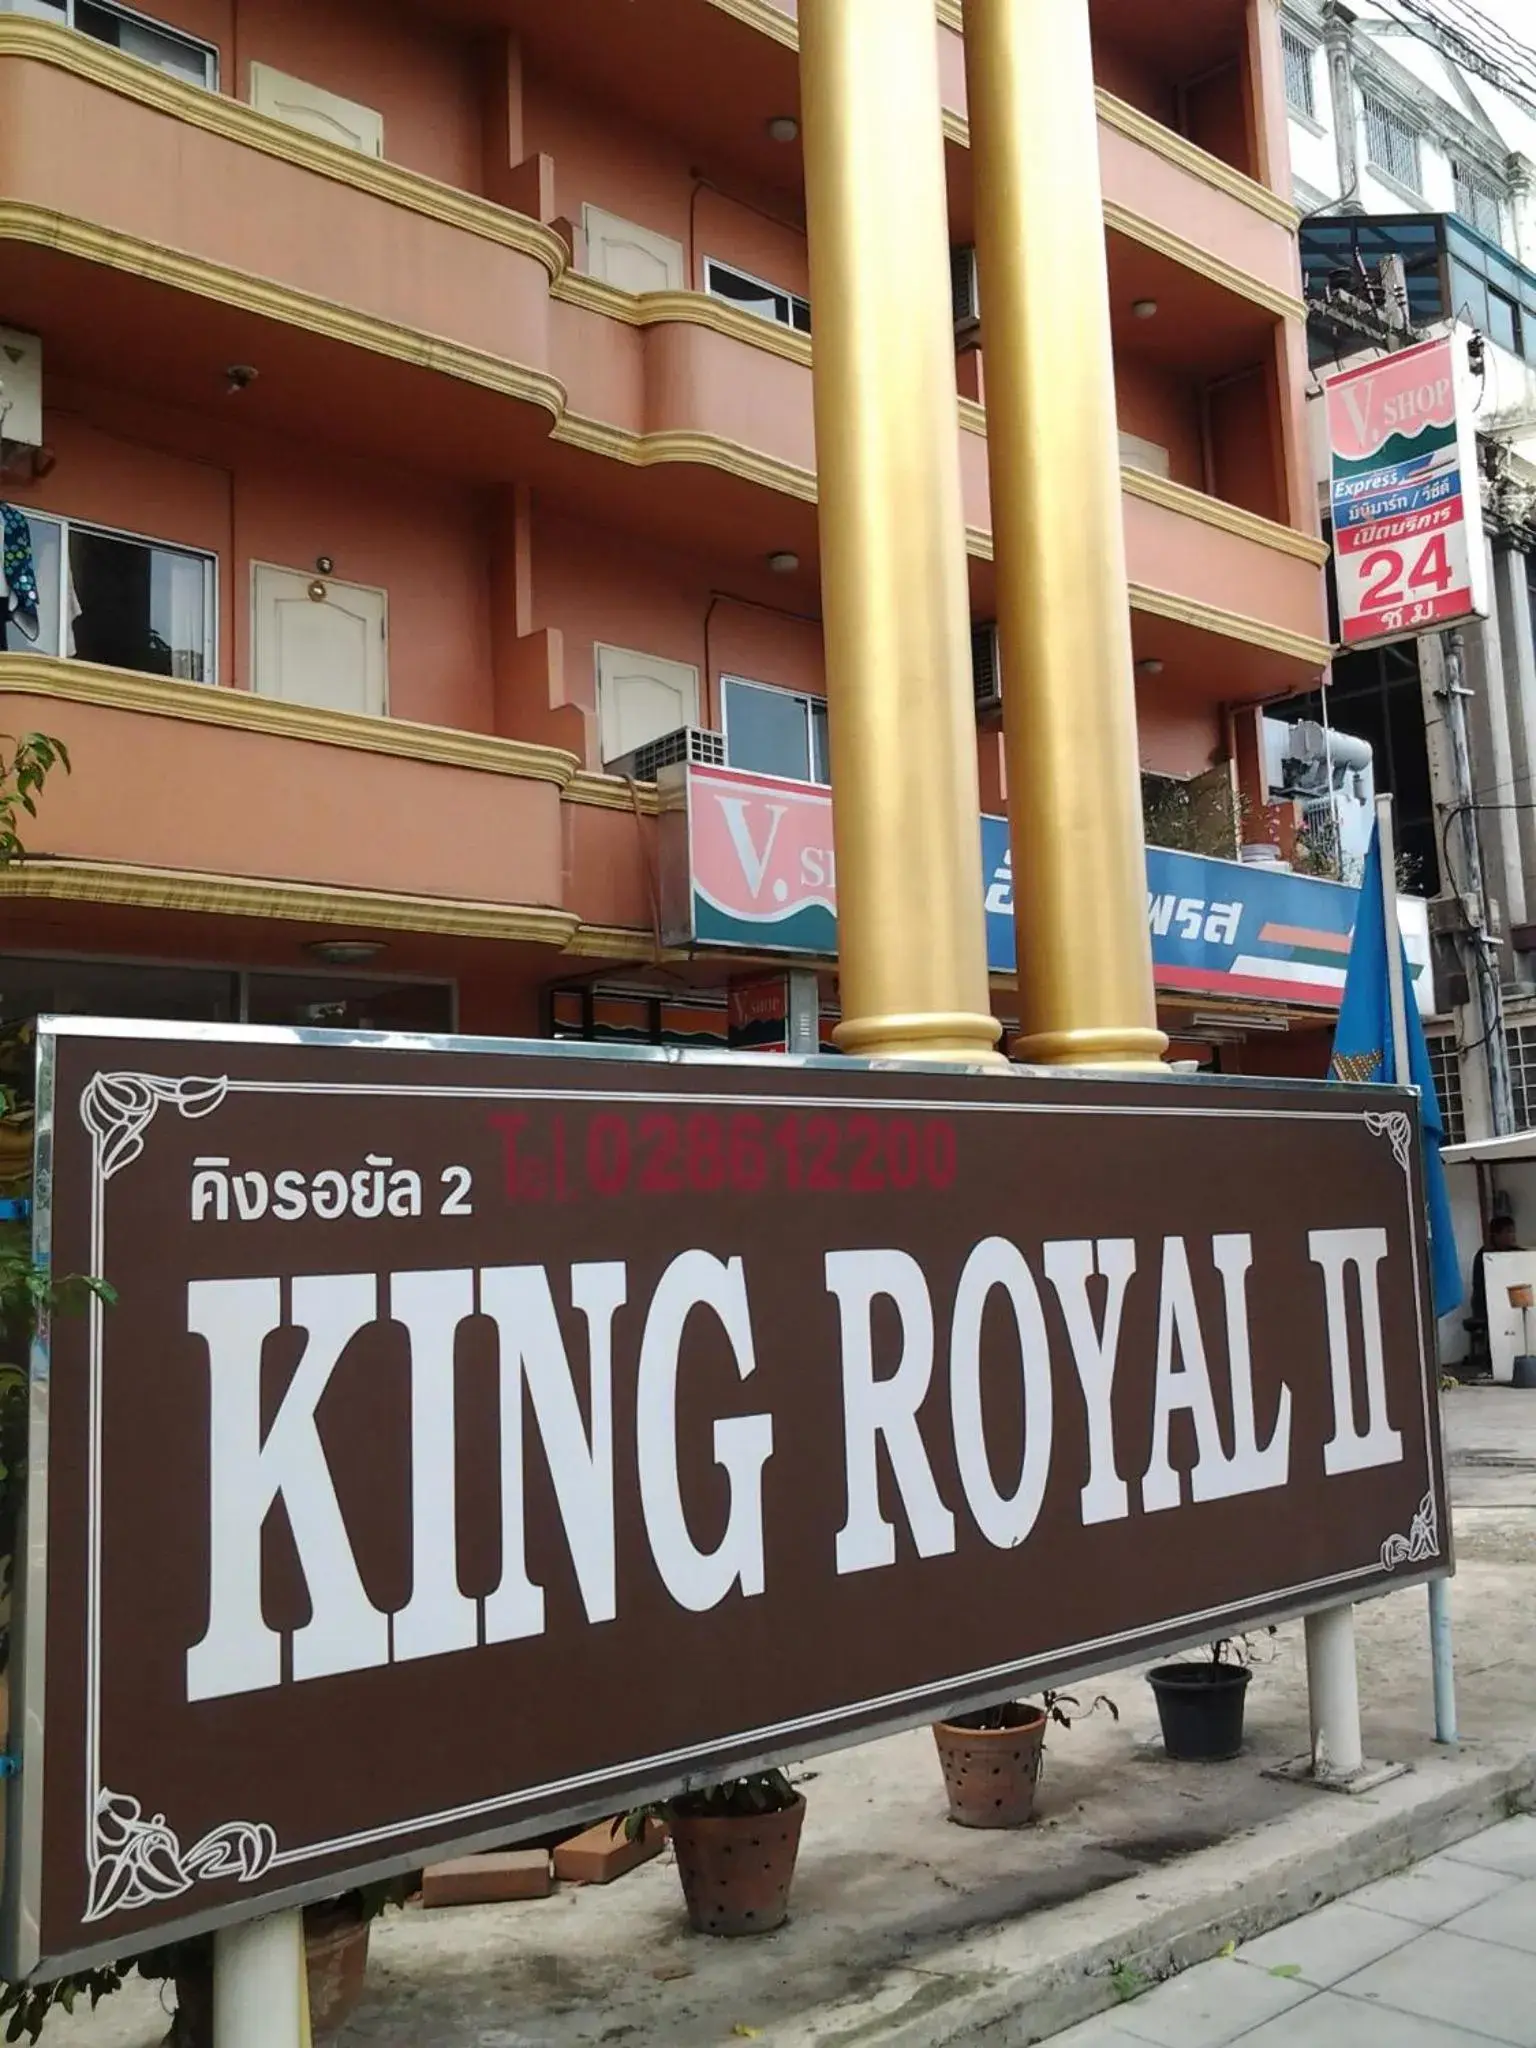 Property logo or sign in King Royal II Hotel